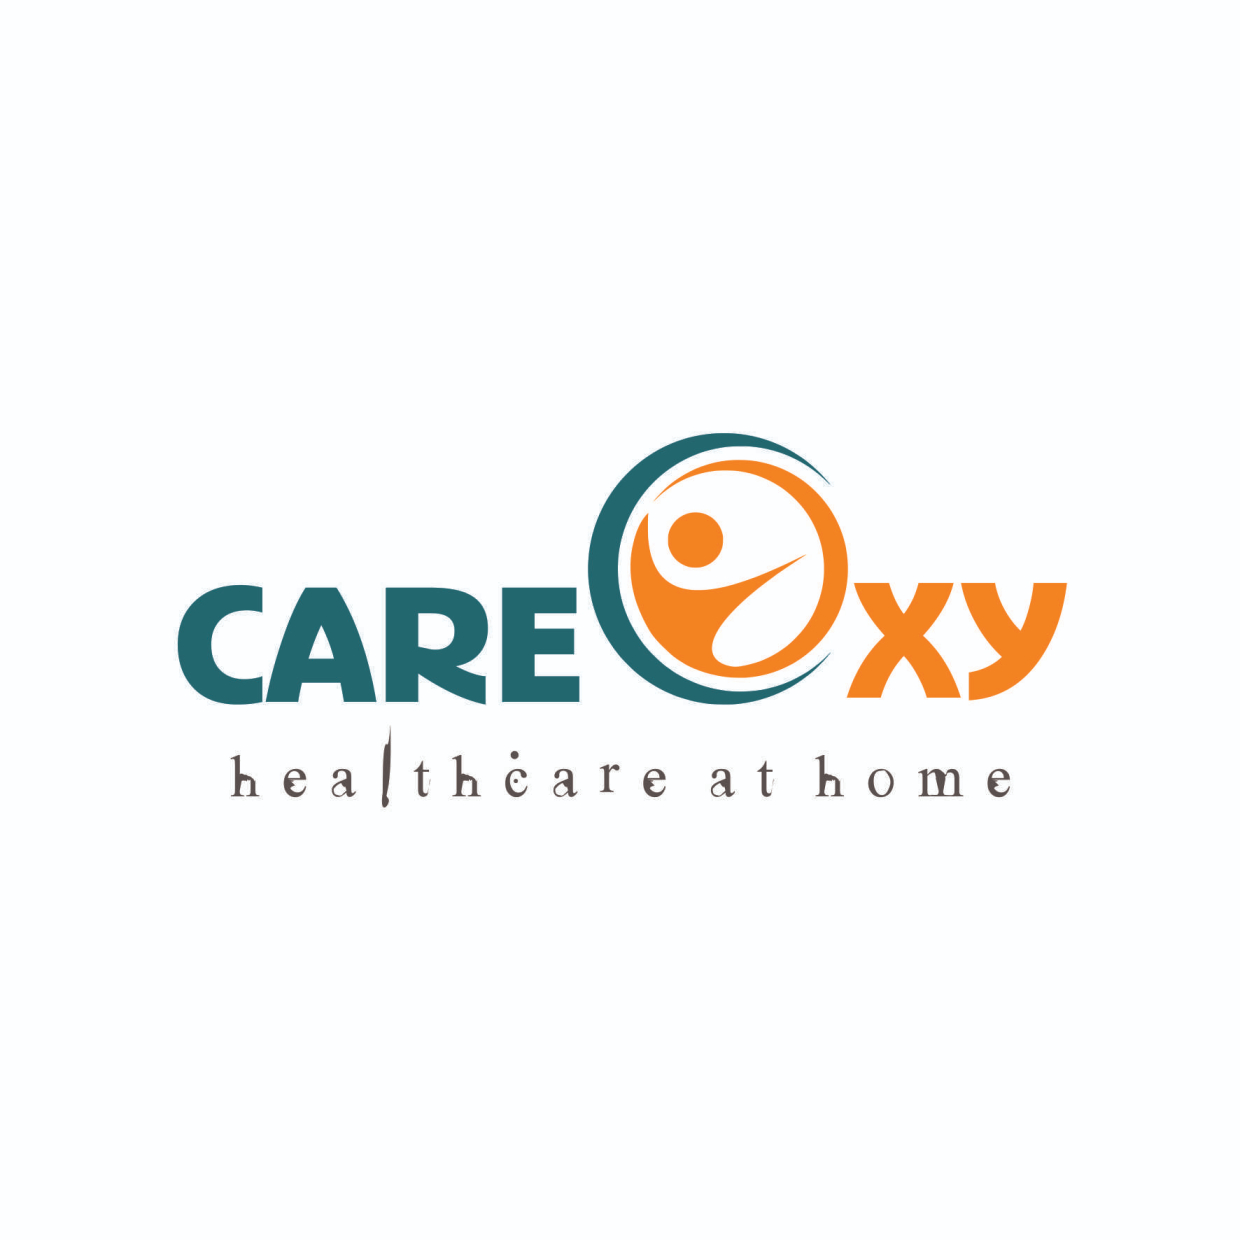 Careoxy Company Healthcare Services Private Limited